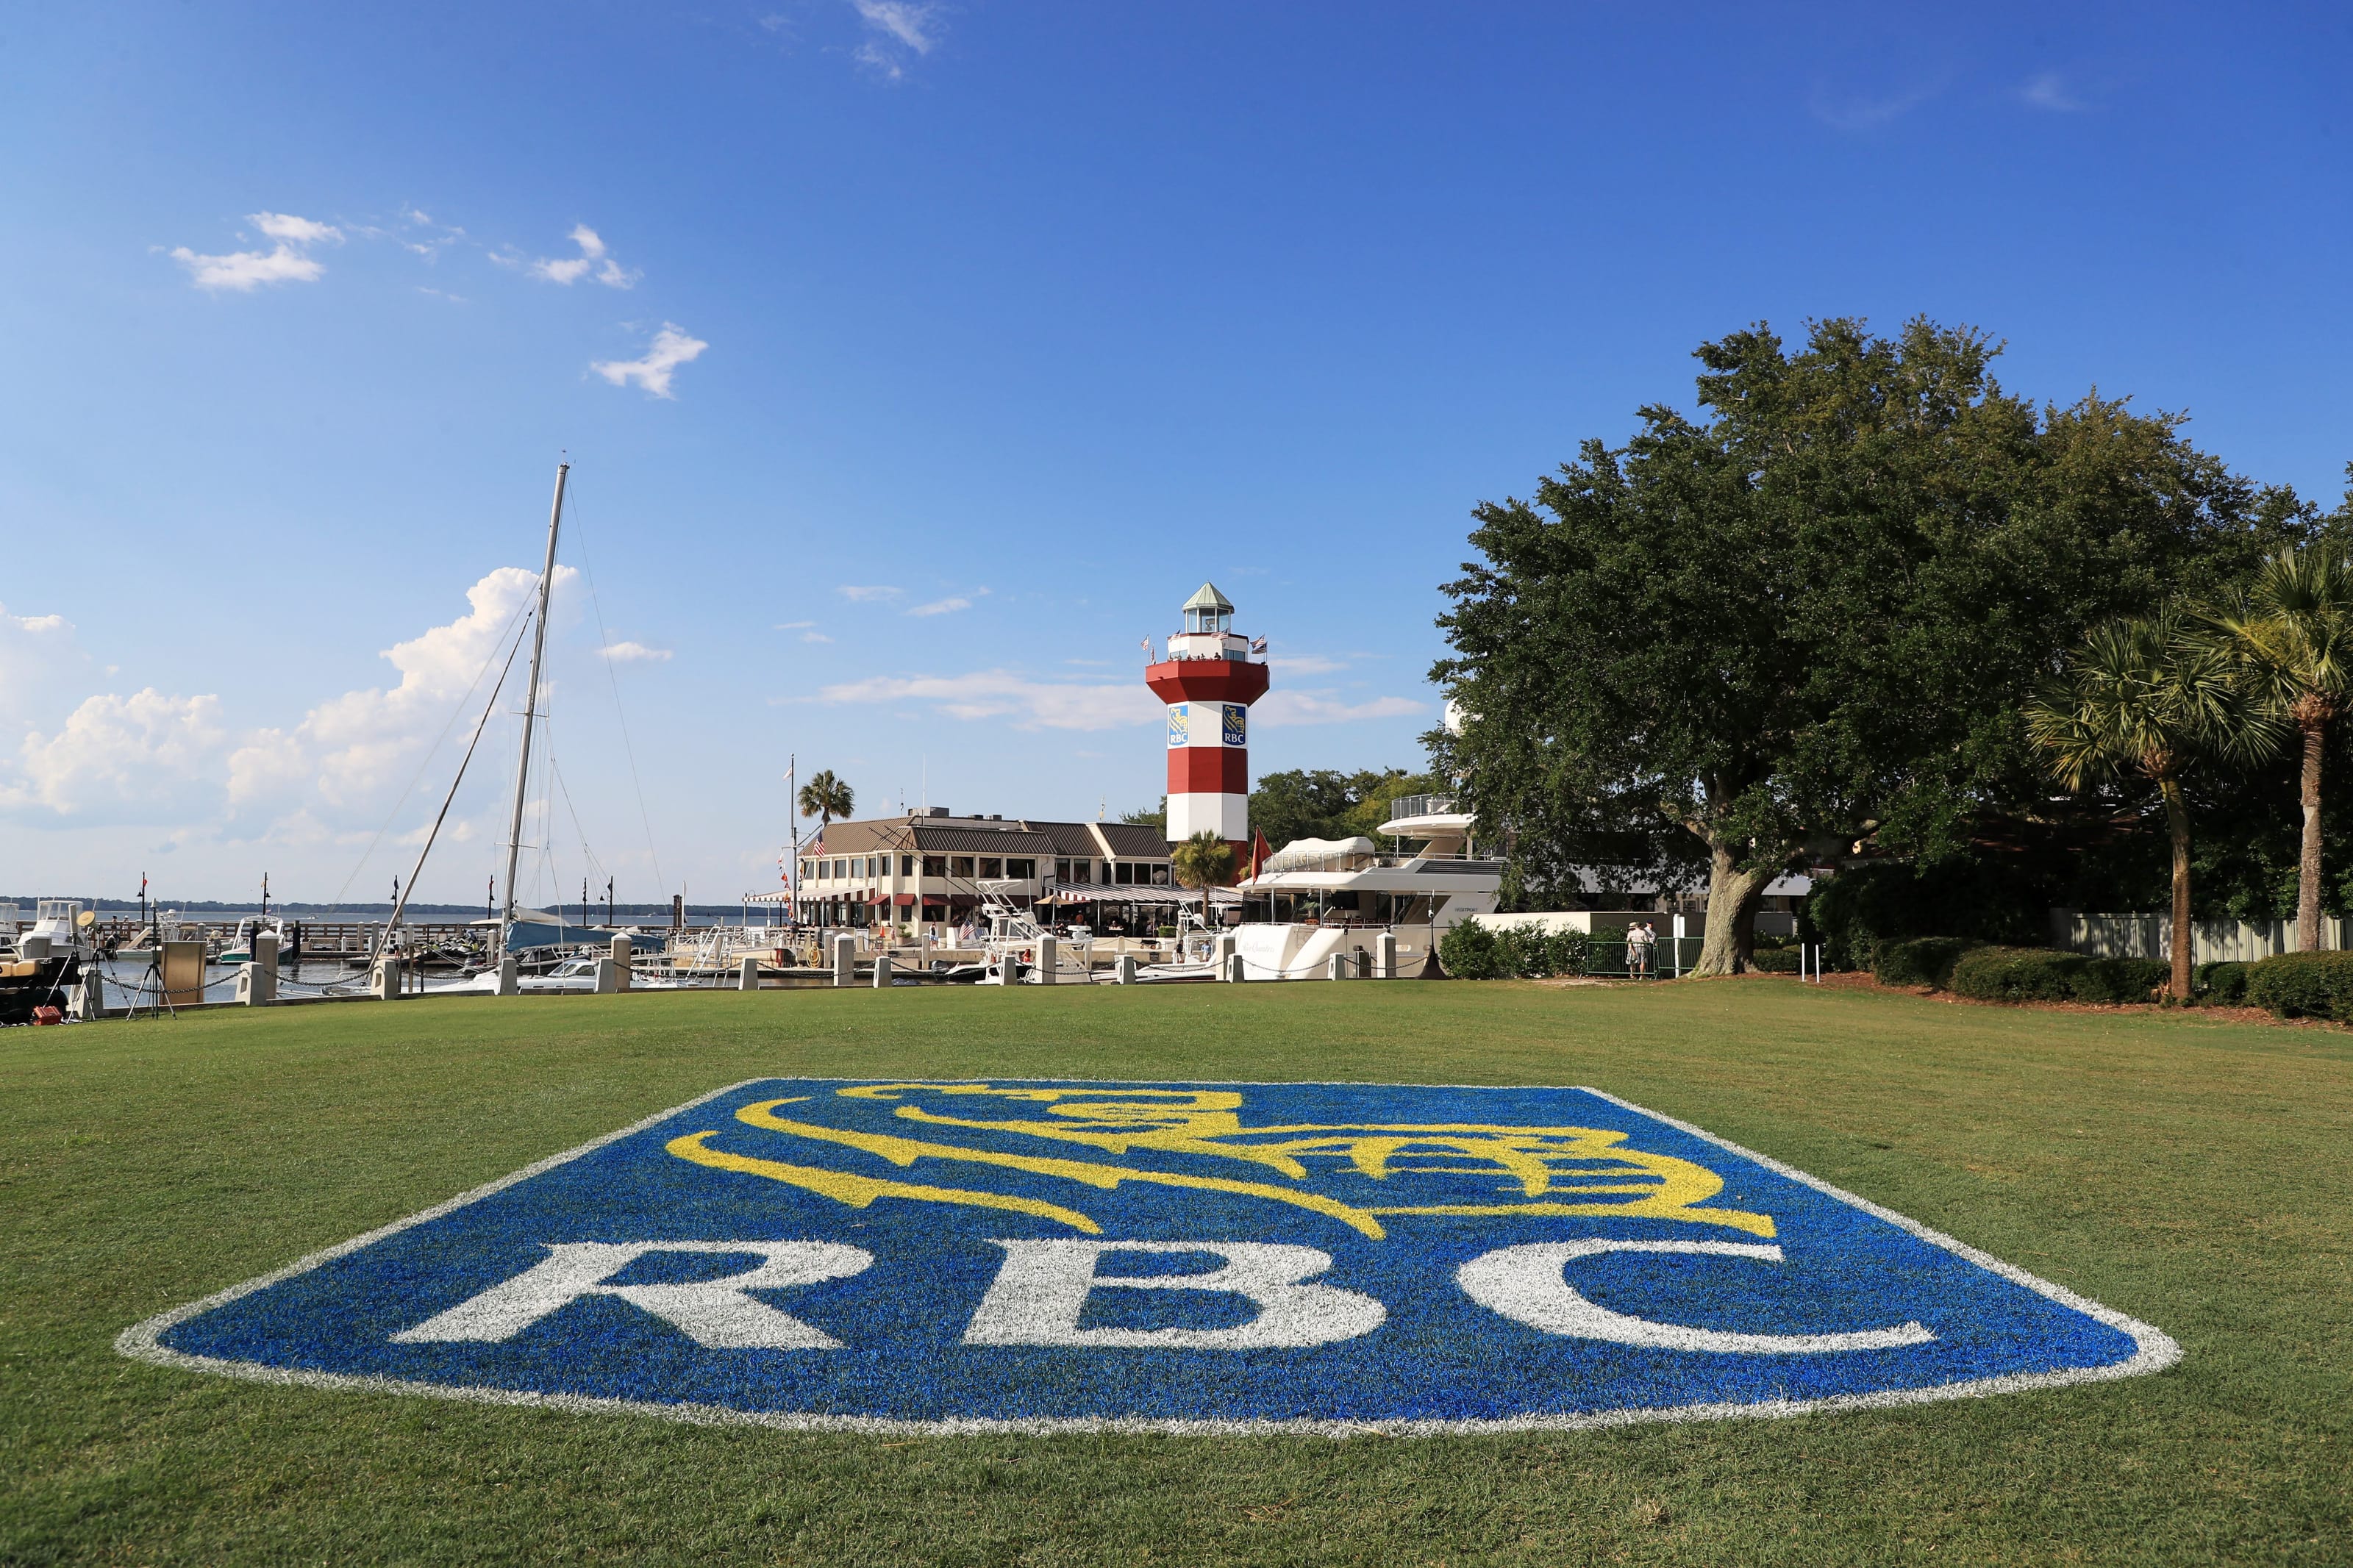 2022 RBC Heritage Top 10 Power Rankings At Harbour Town